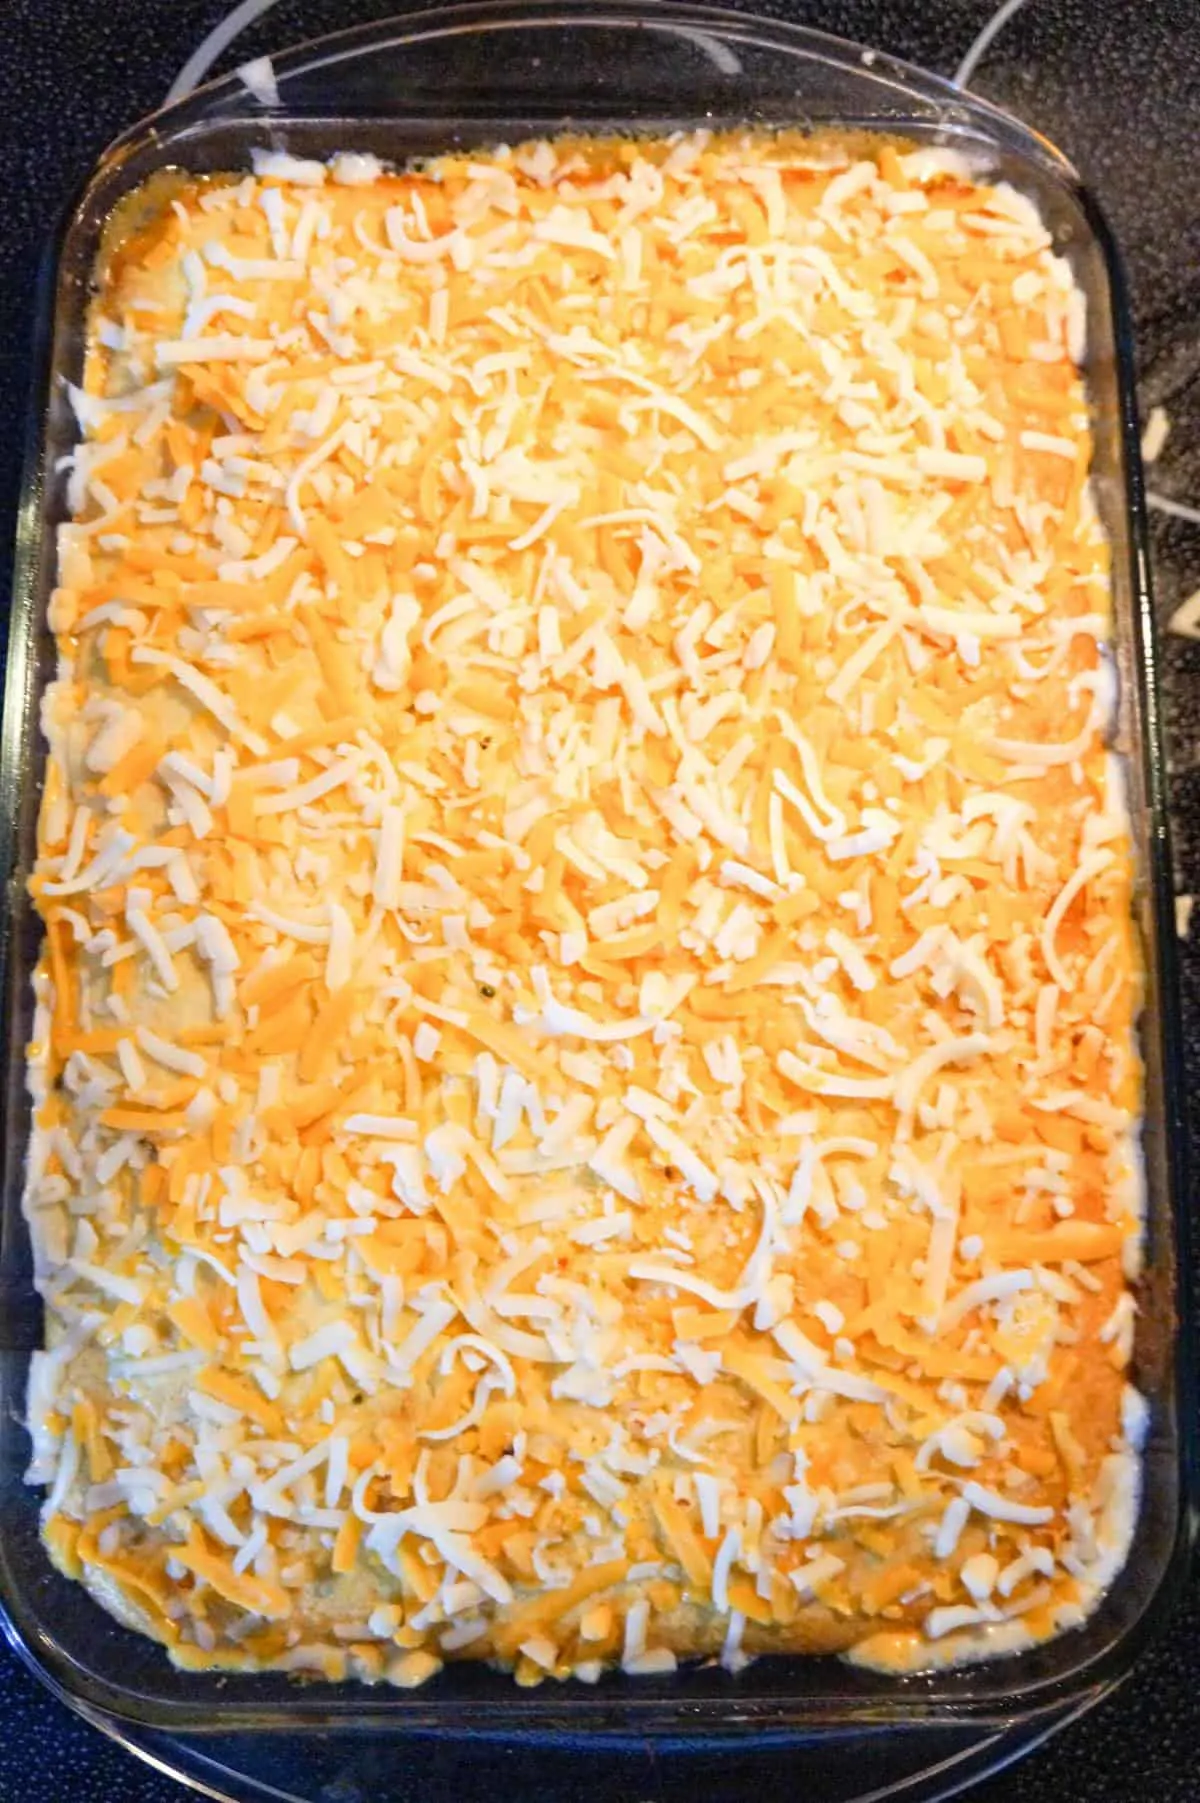 shredded cheese on top of cornbread in a baking dish